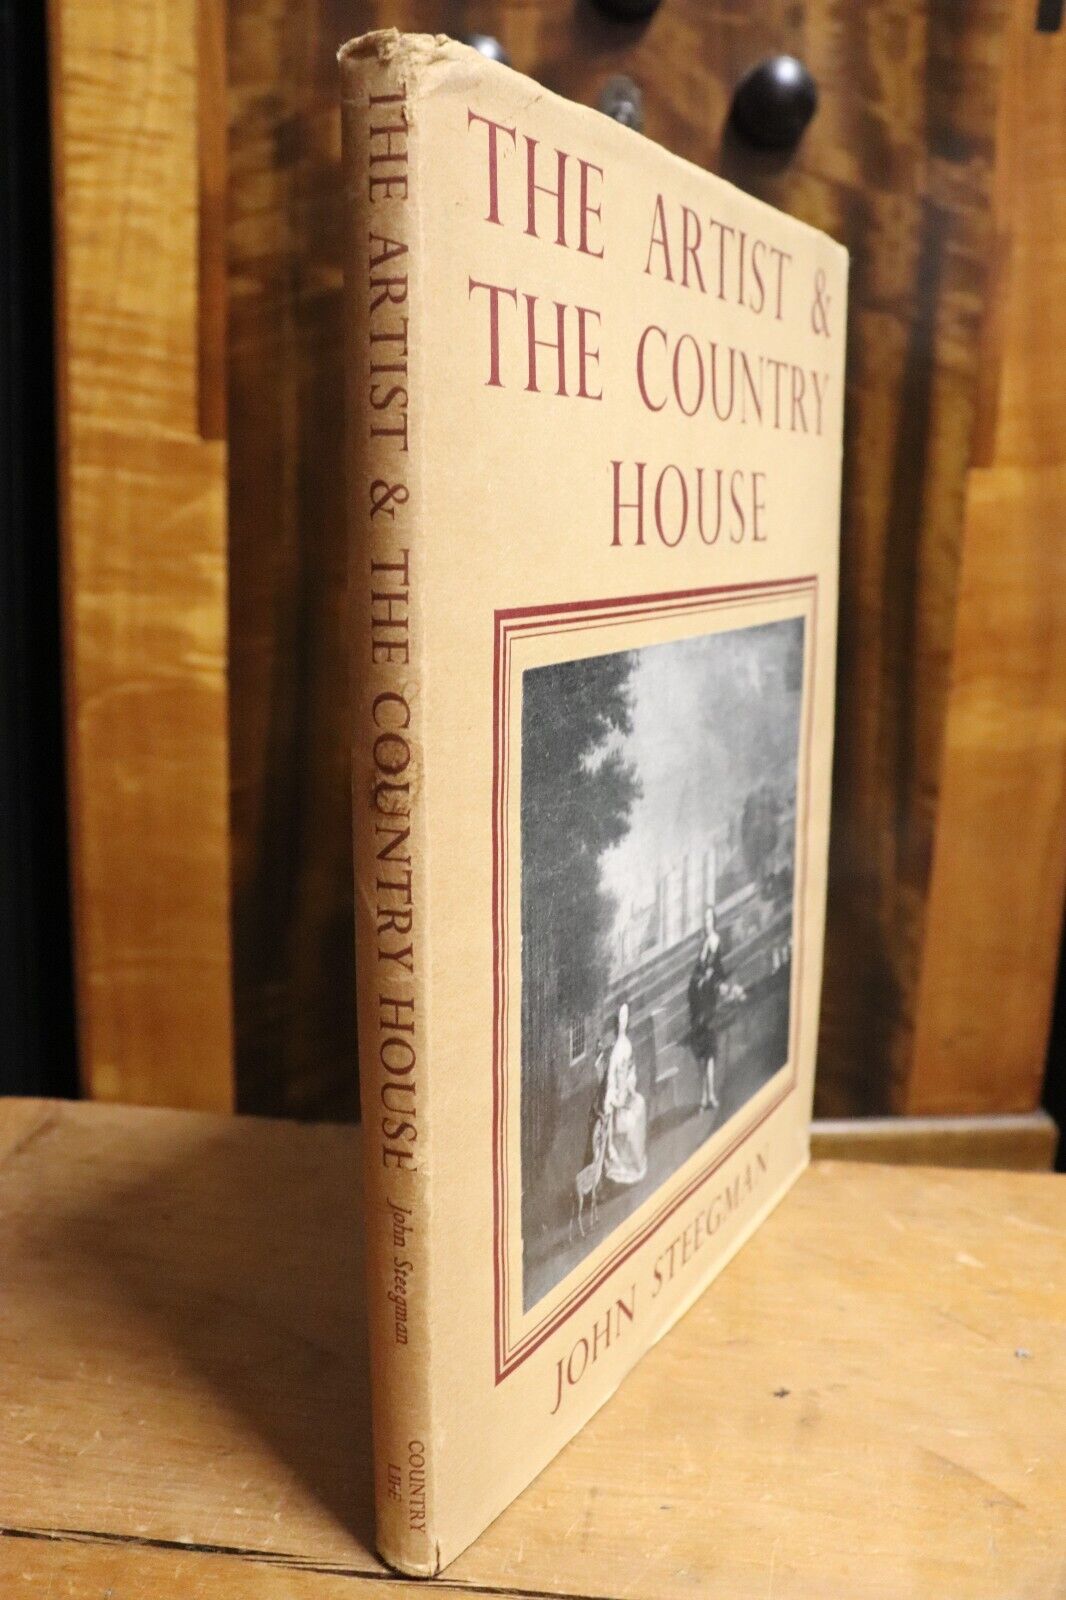 The Artist & The Country House - 1949 - 1st Edition - Vintage Art Book - 0